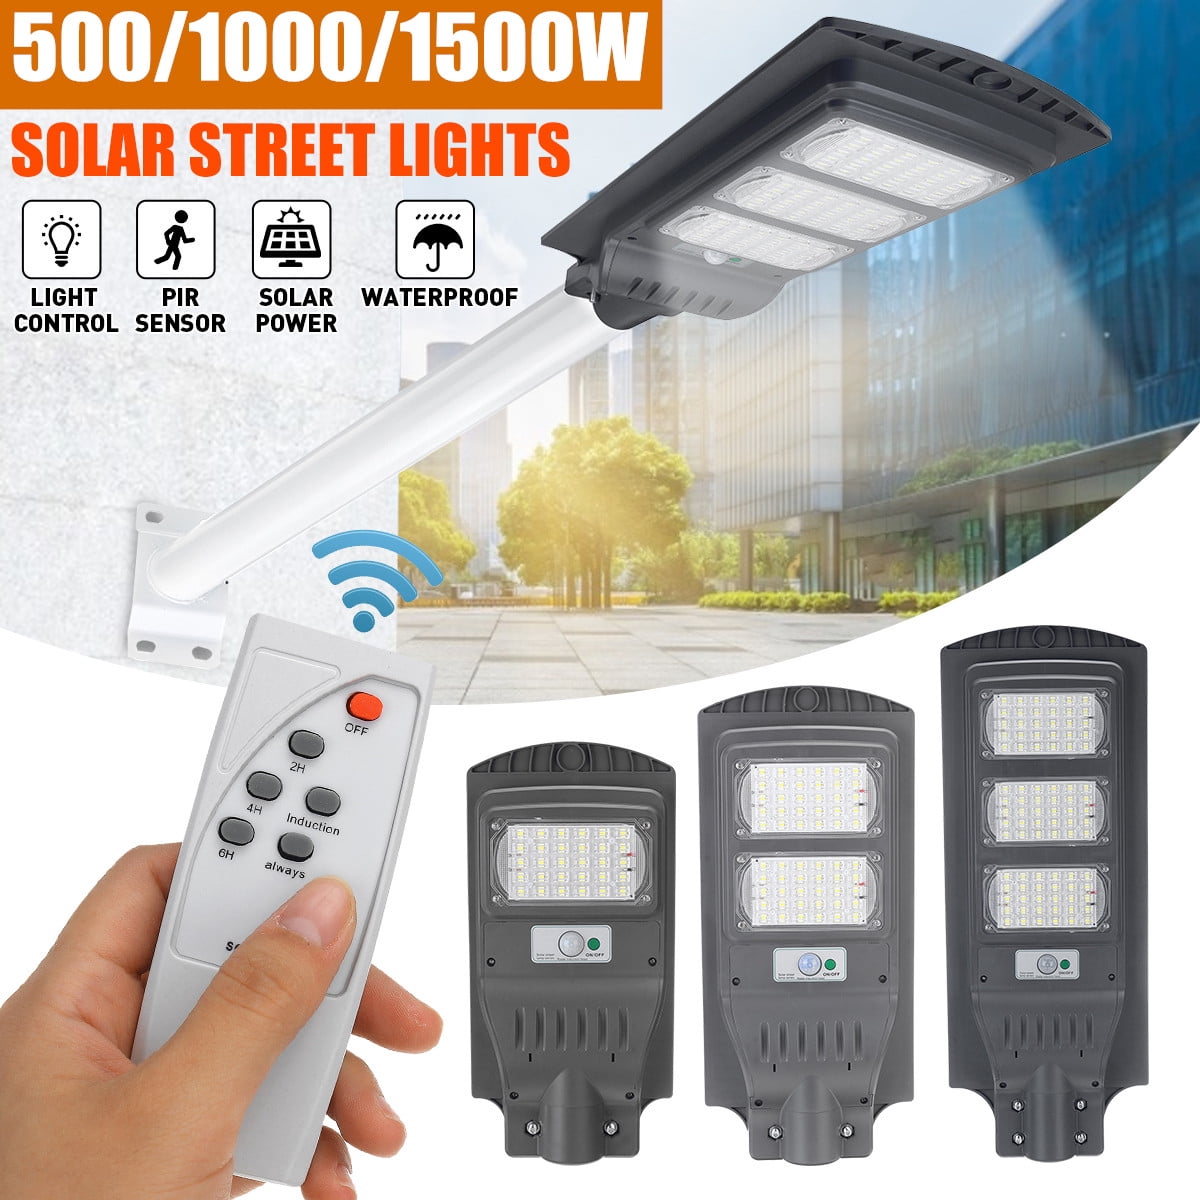 Details about   500W LED Solar Street Light PIR Motion Sensor Outdoor Wall Lamp Remote Control 